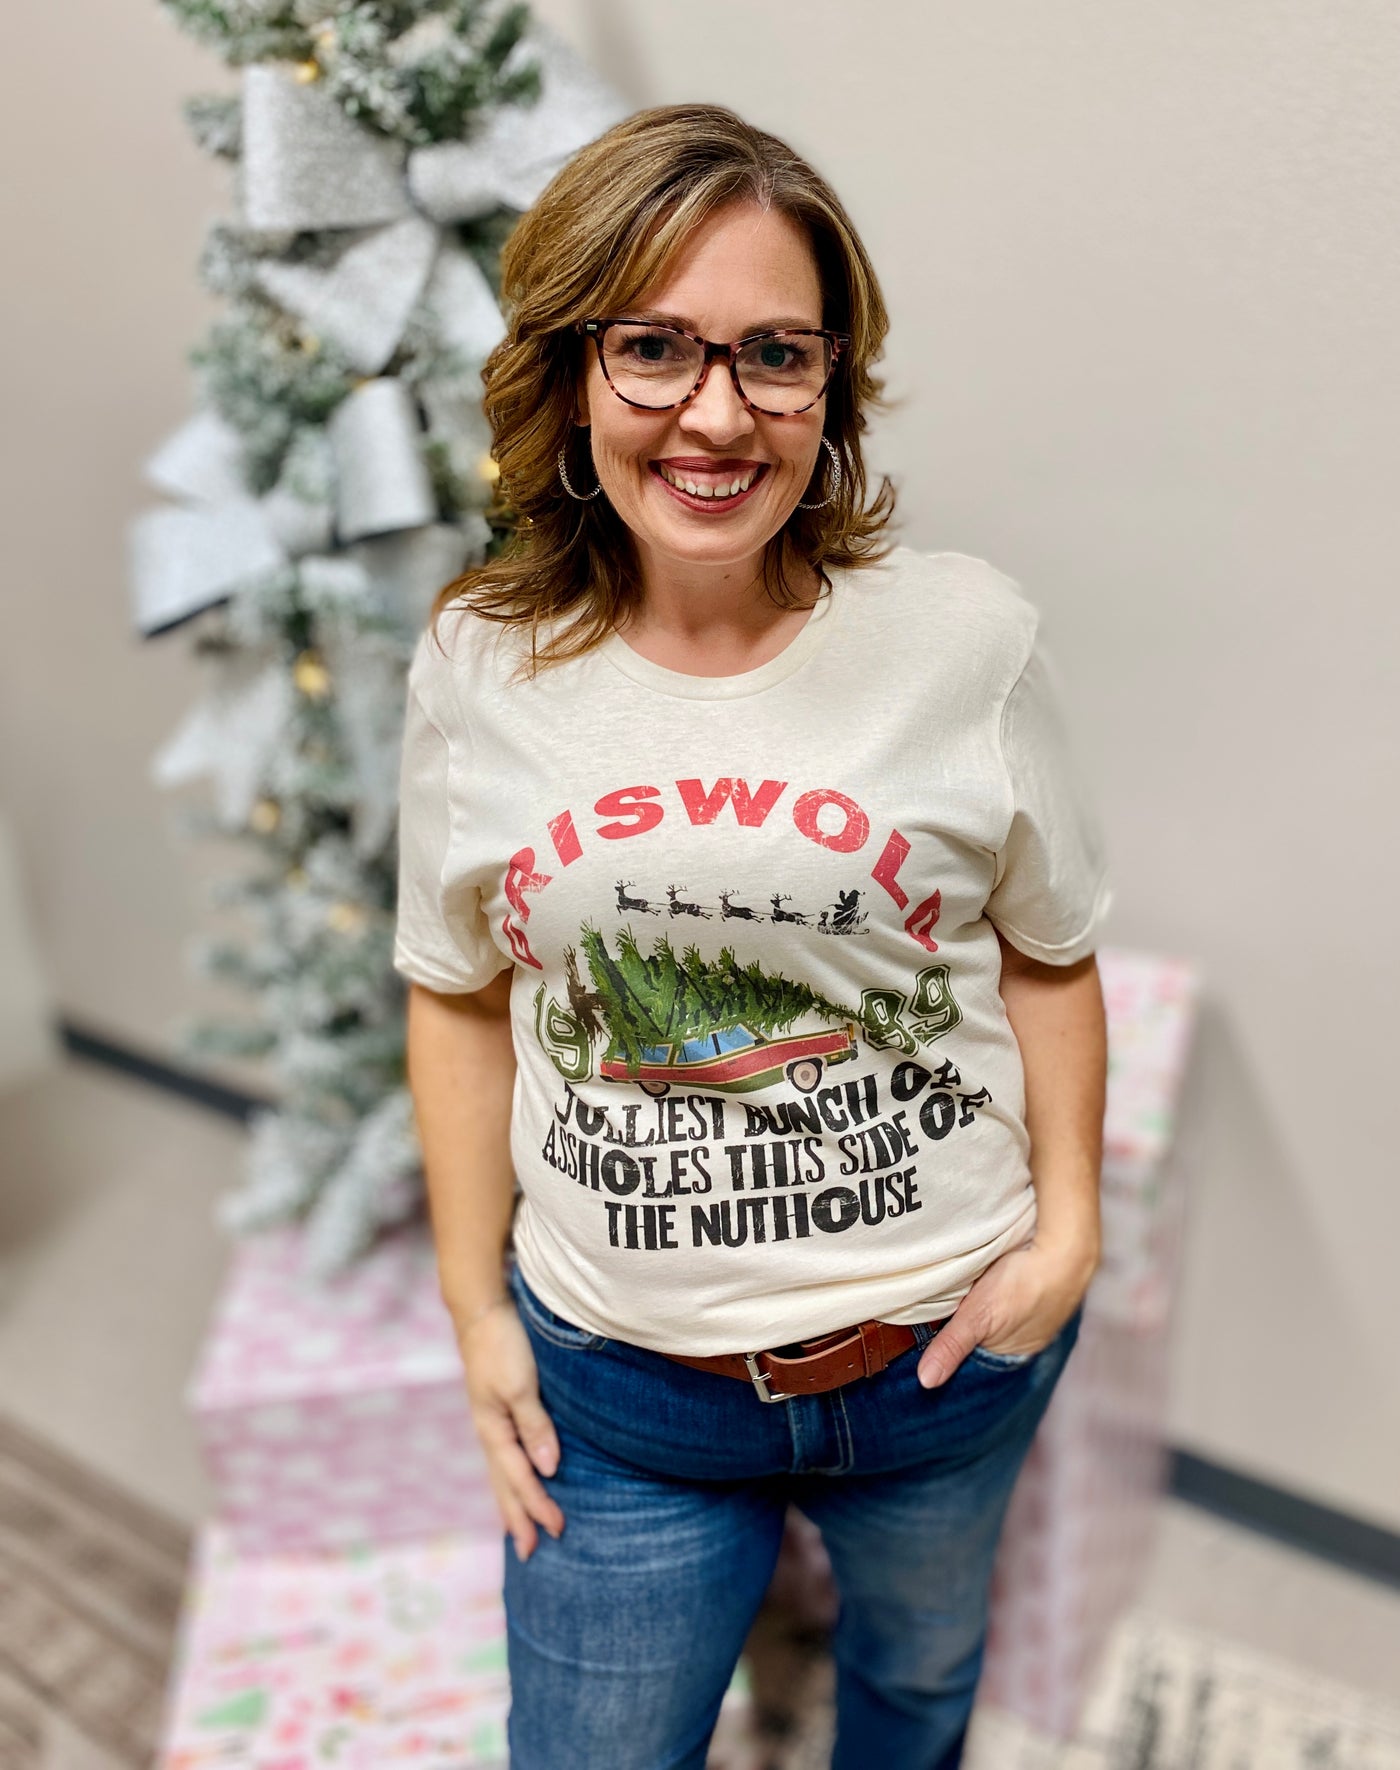 Griswold T-shirt